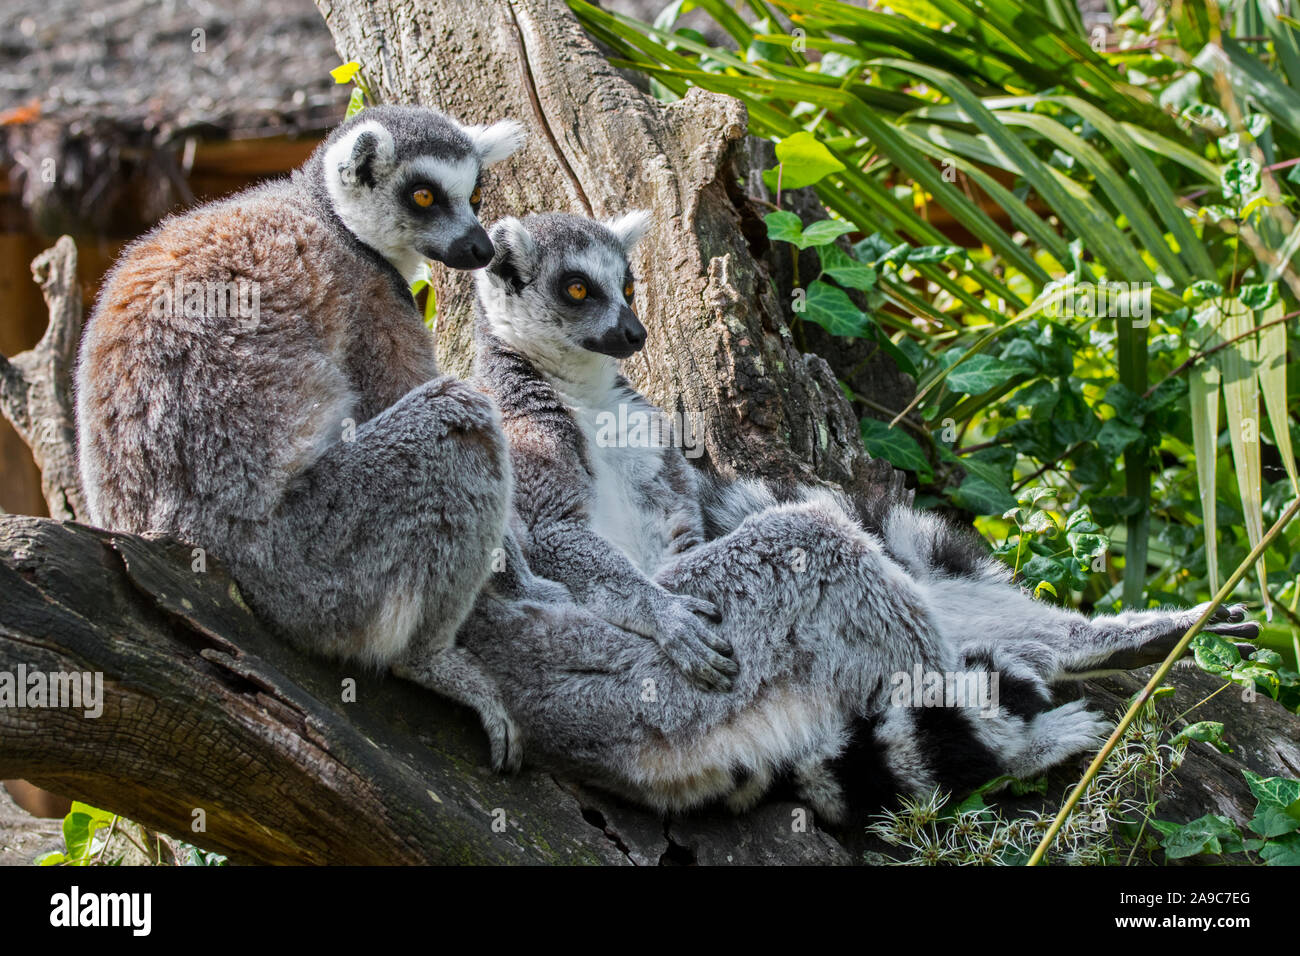 Ring-tailed lemur (Lemur catta) pair in forest, primate native to Madagascar, Africa Stock Photo